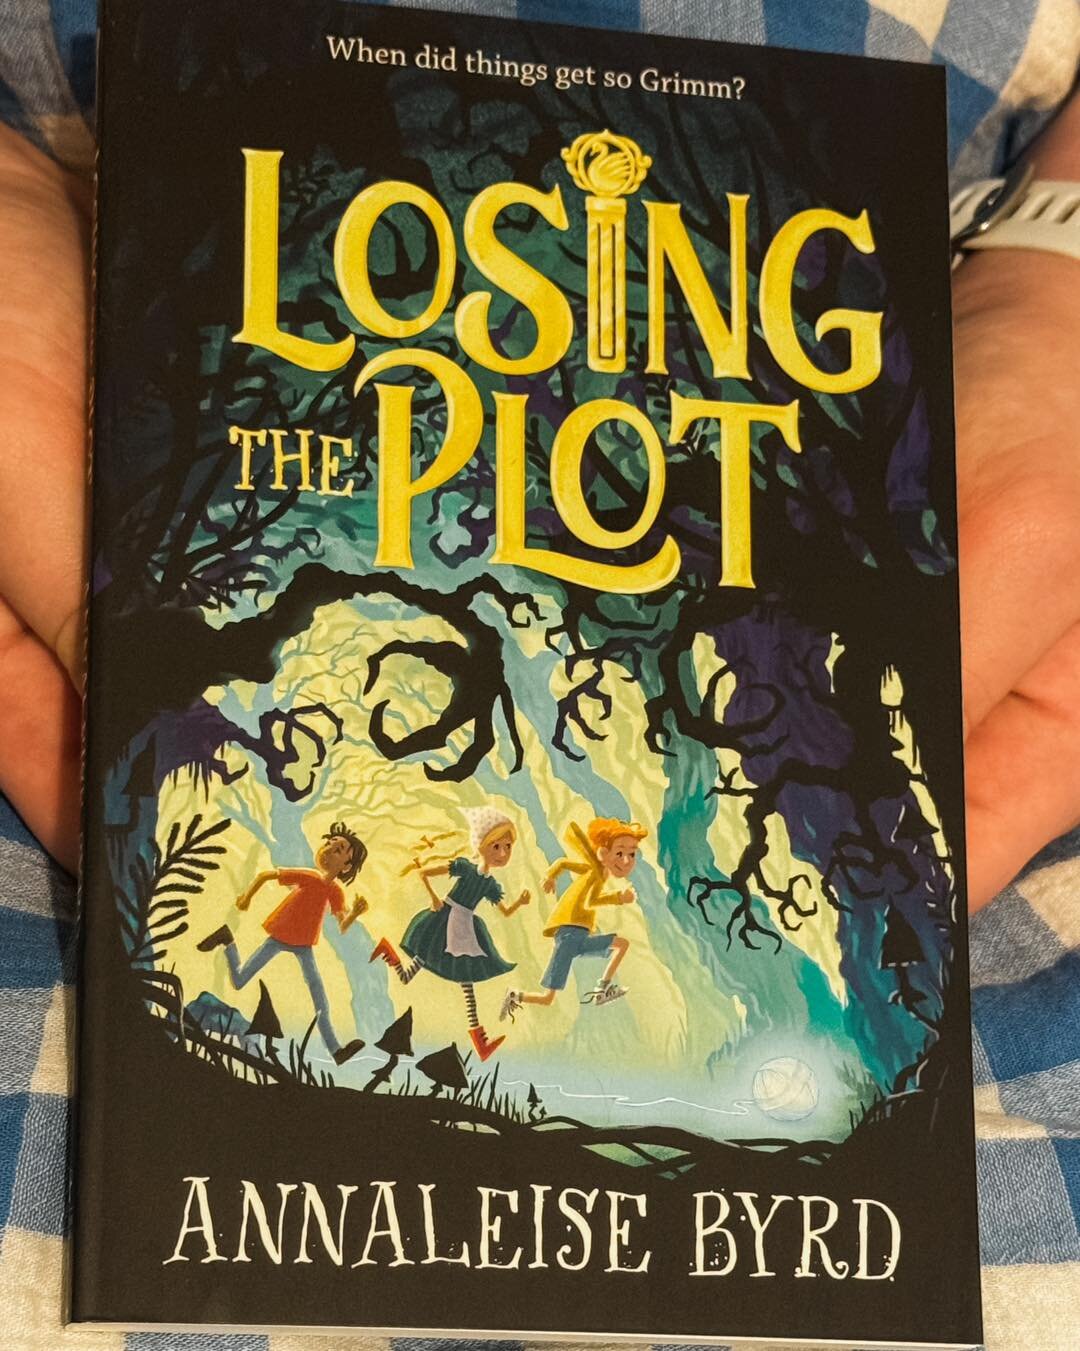 Look what I started reading with my daughter tonight @annaleisebyrd! Congratulations on your publication day tomorrow - may it be the first of many 🎉